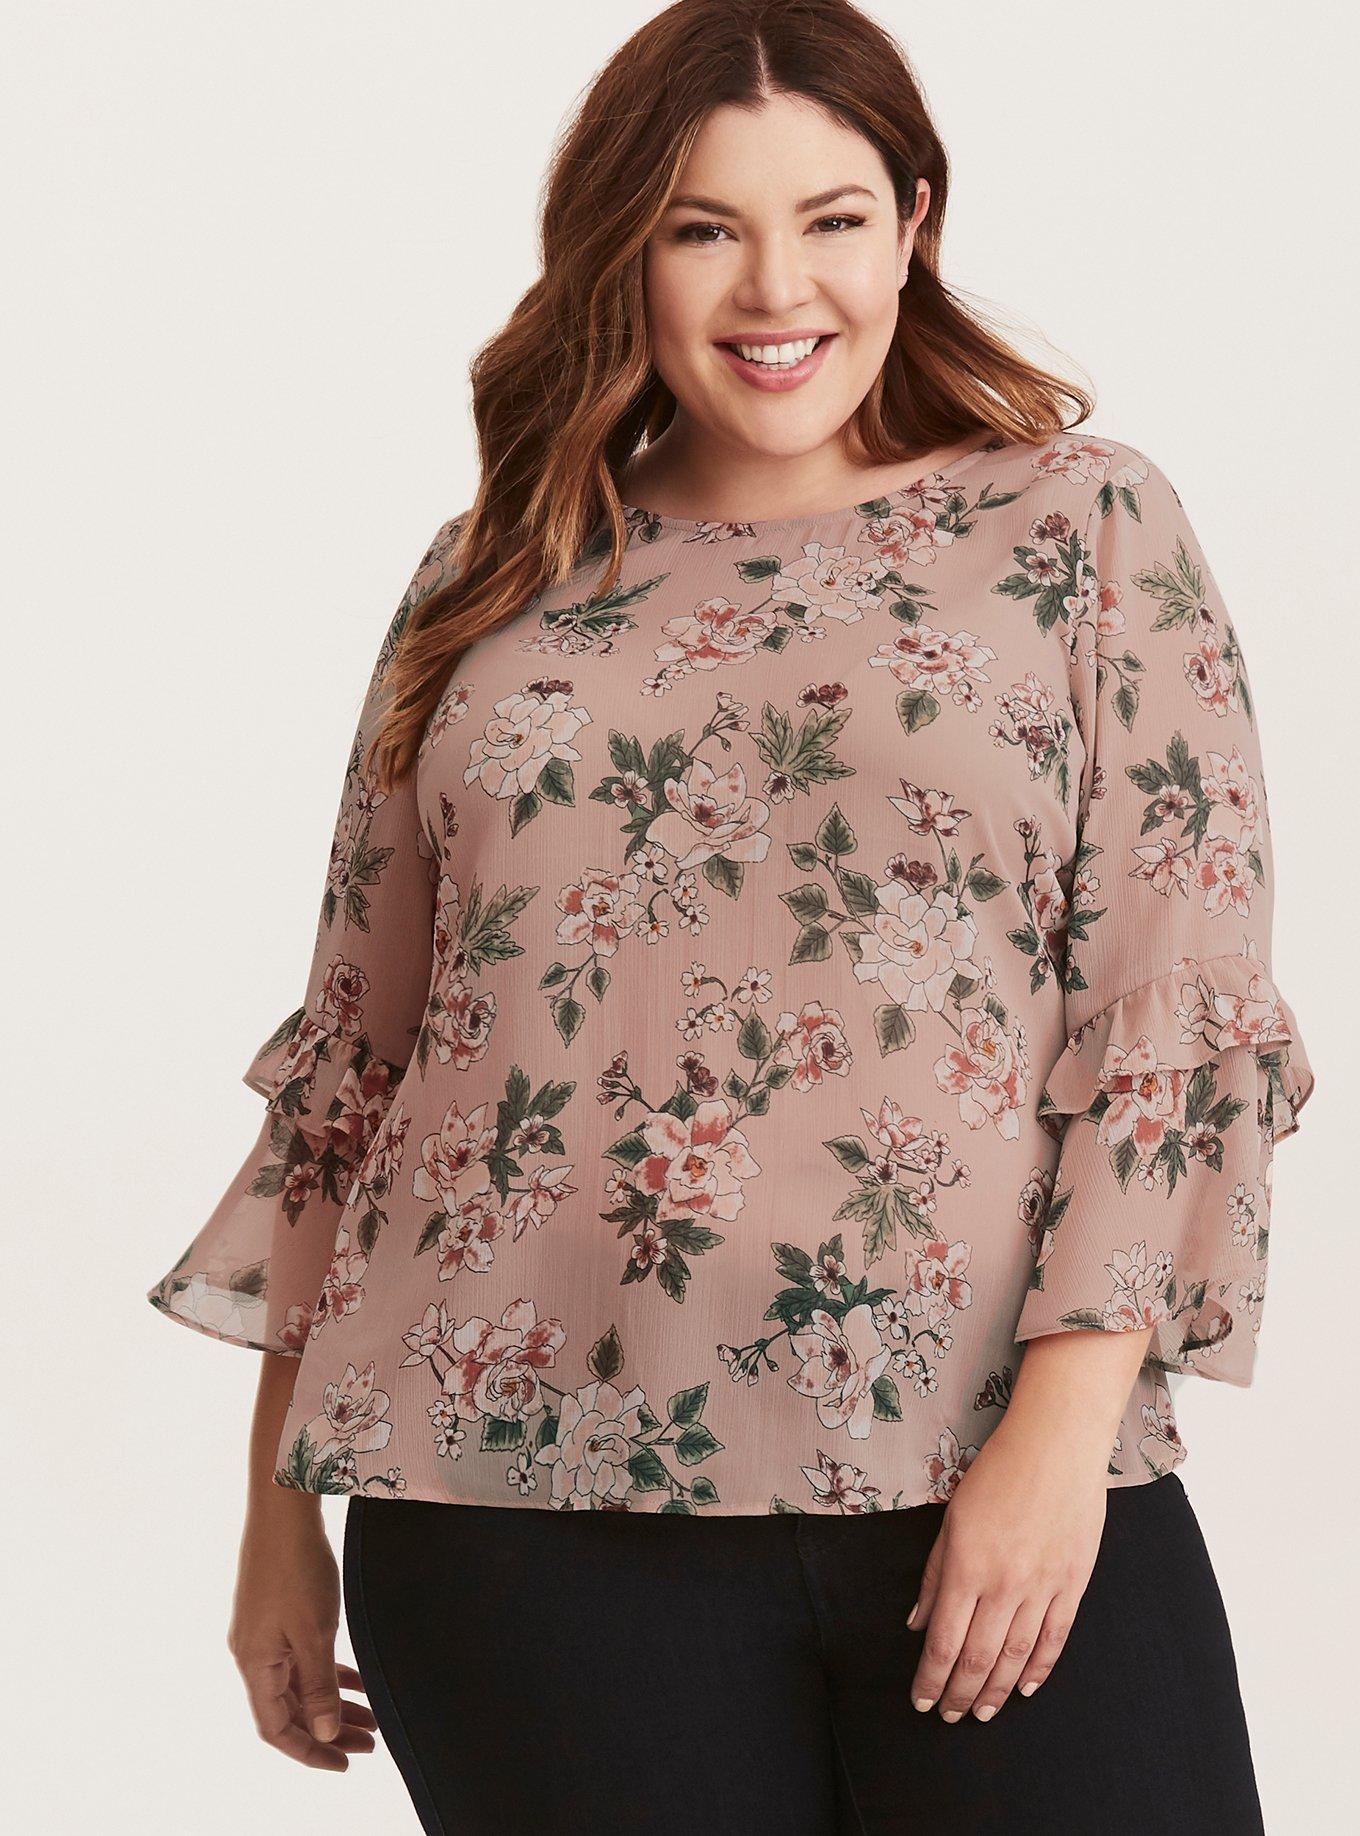 Plus Size - Floral Print Chiffon Ruffle Bell Sleeve Strappy Blouse - Torrid